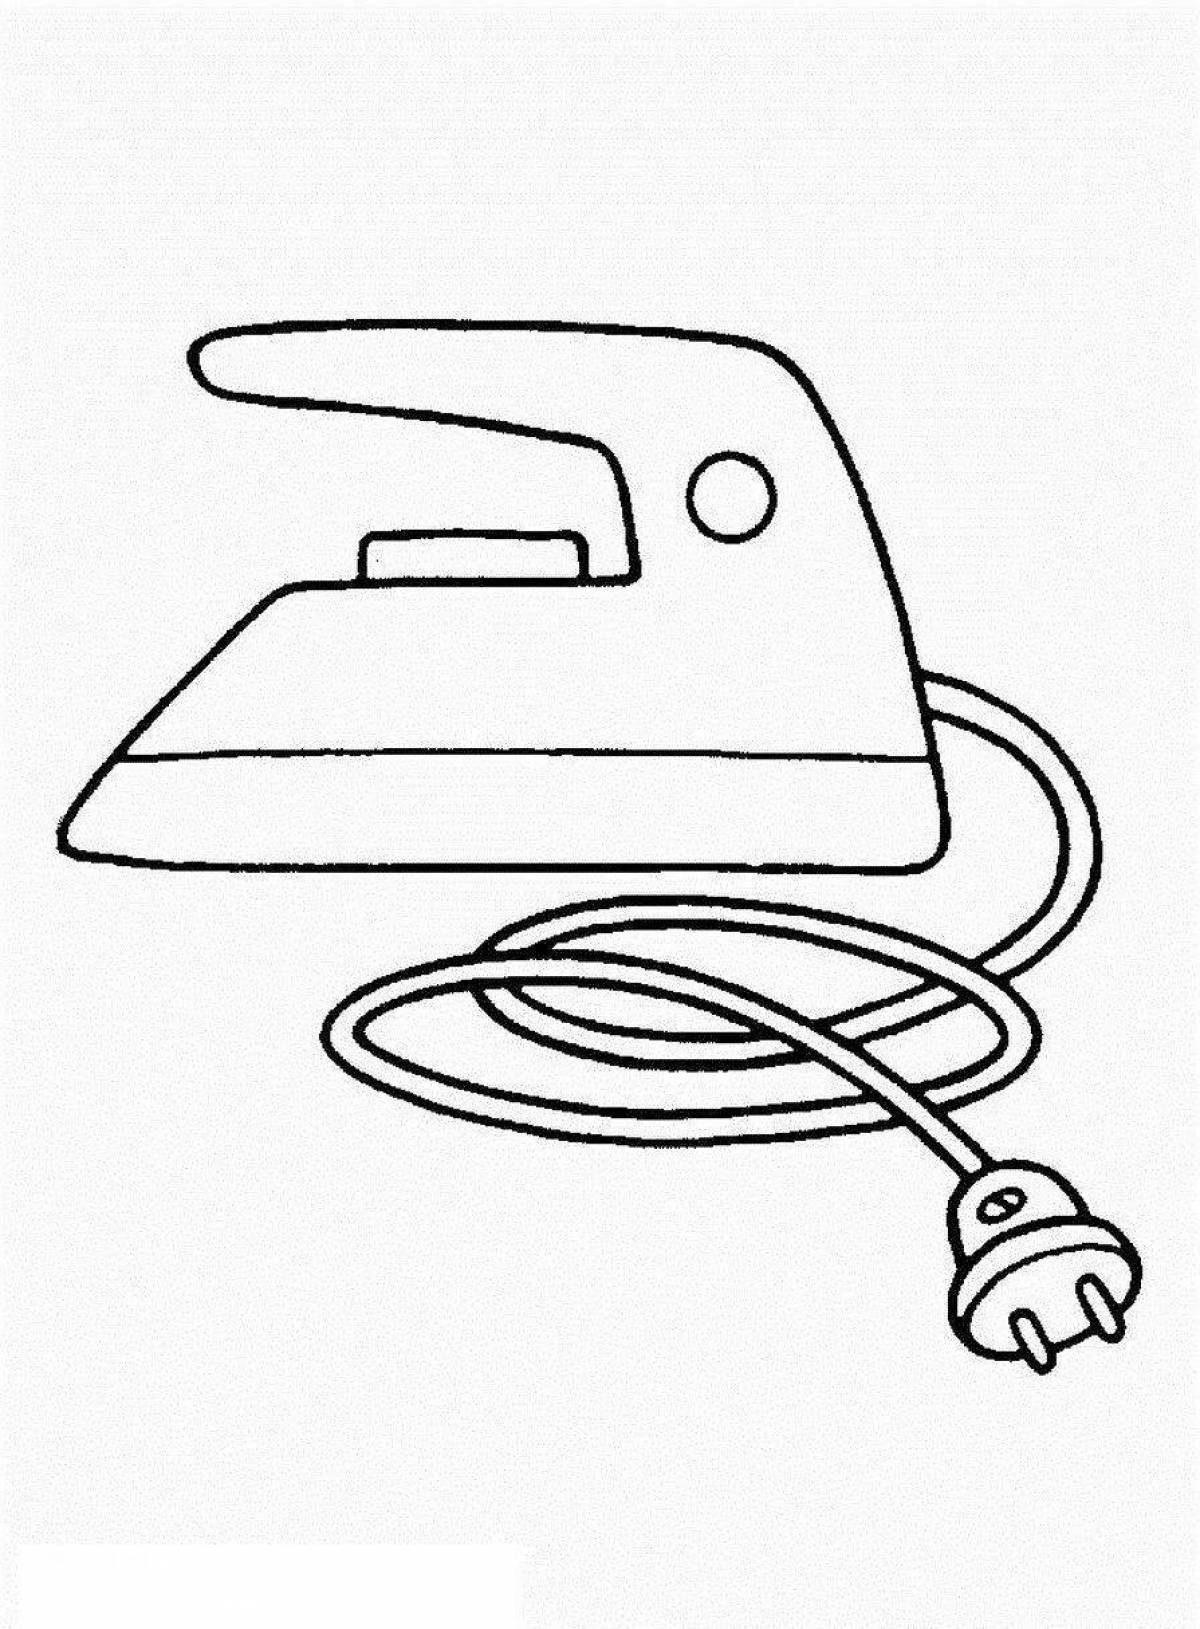 Coloring page impressive electrical devices